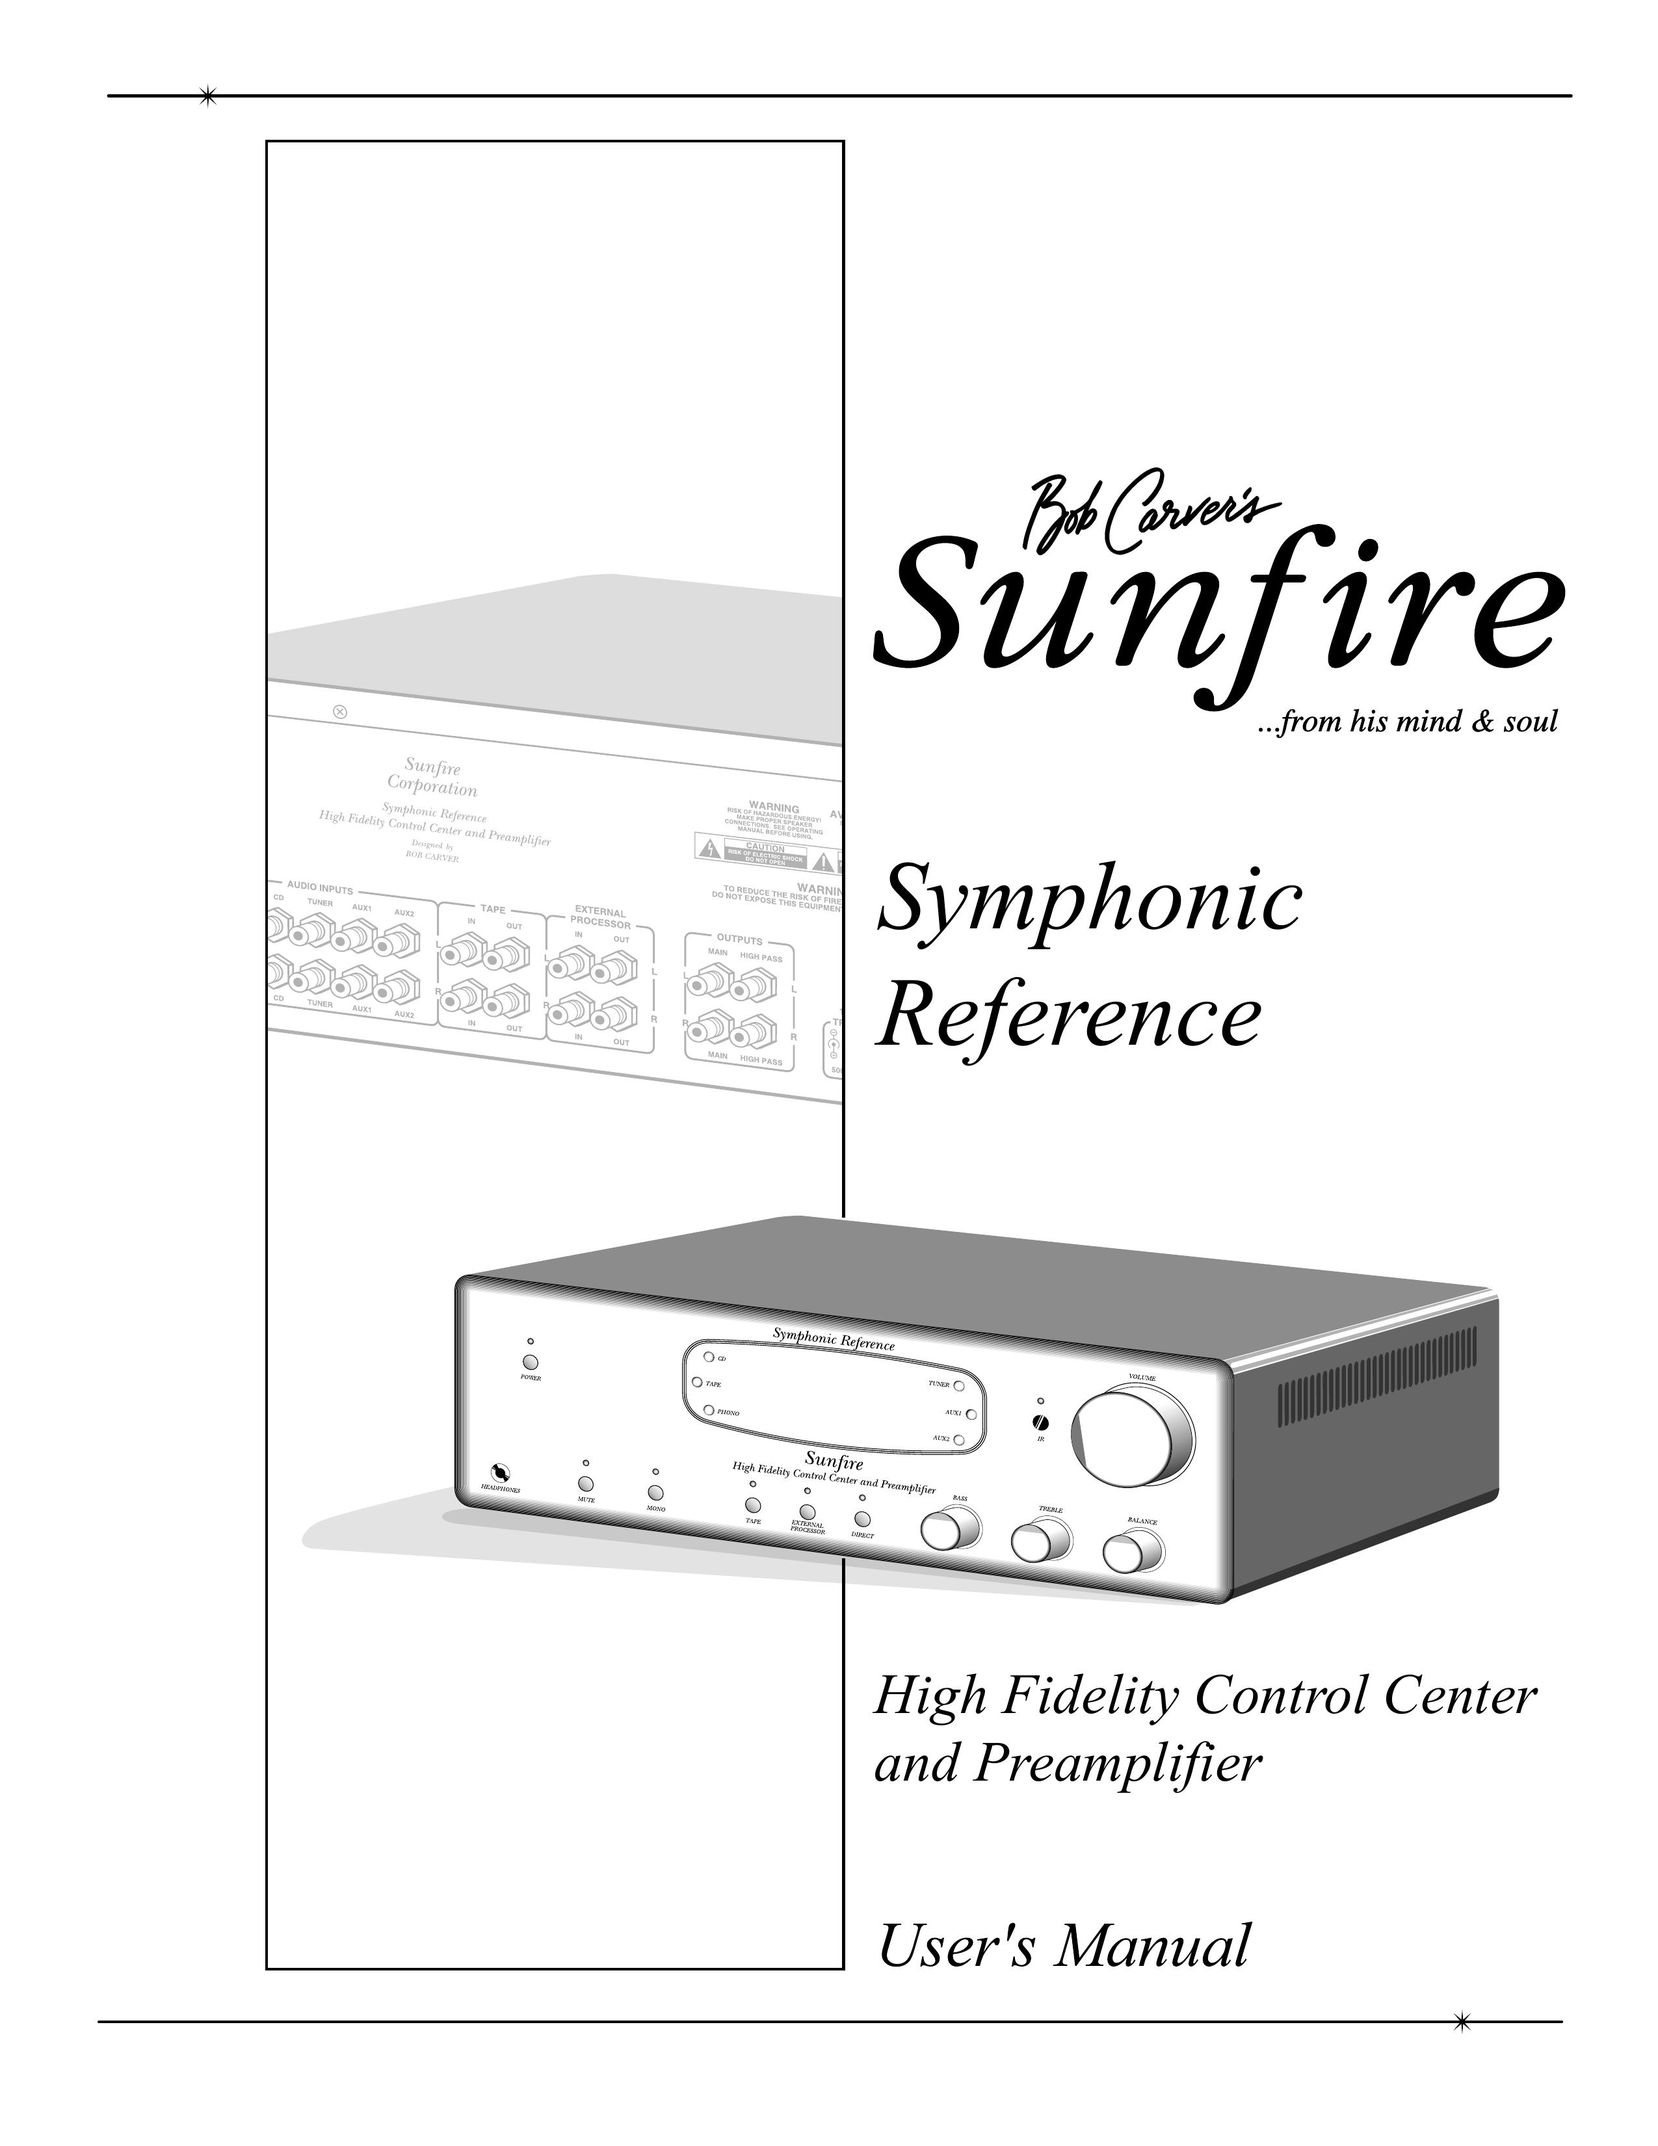 Sunfire Symphonic Reference High Fidelity Control Center and Preamplifier Stereo Amplifier User Manual